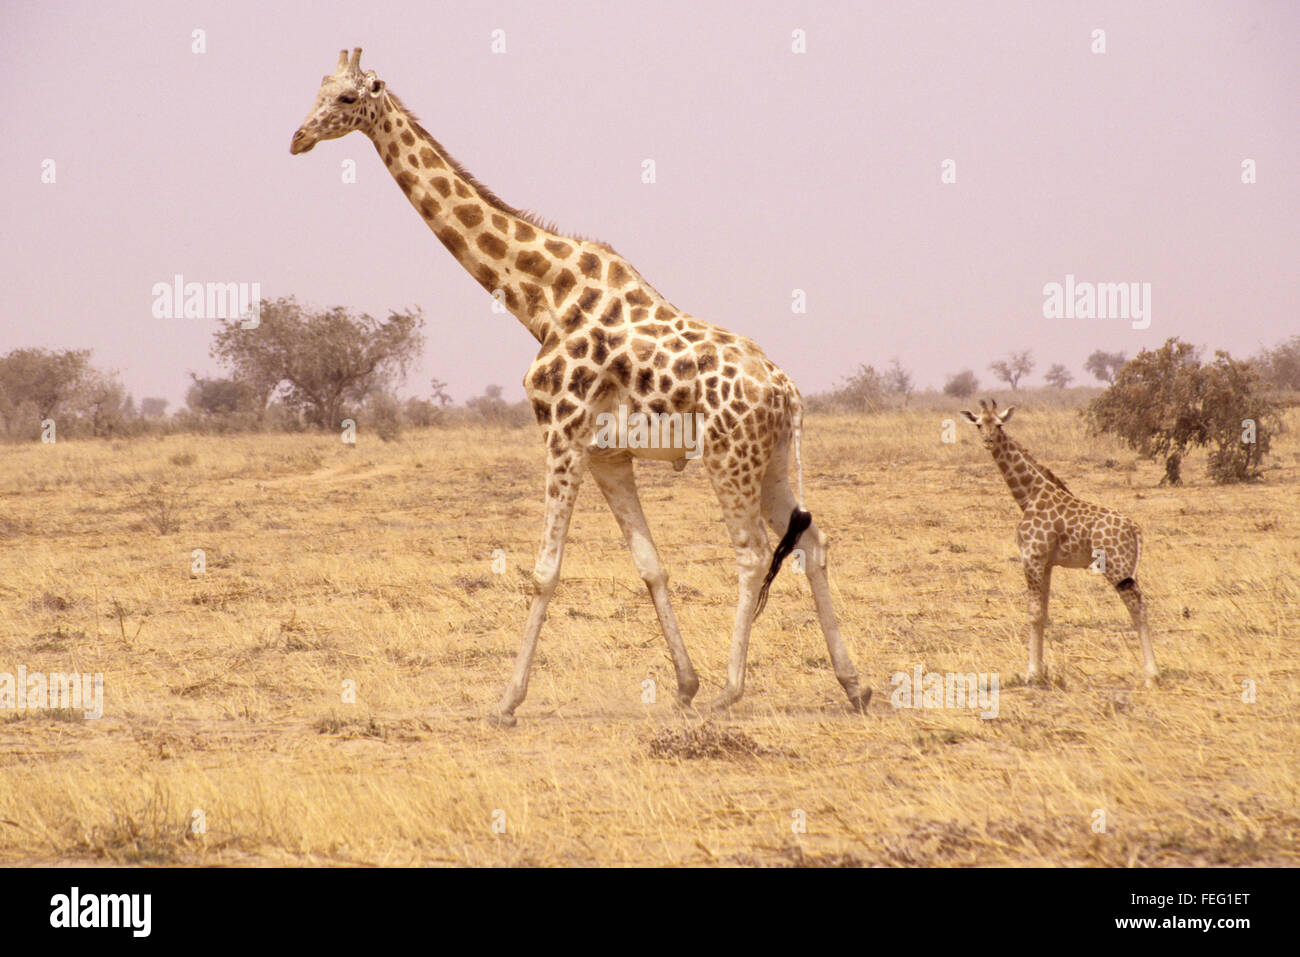 Niger, West Africa.  Mother and Young Giraffe.  Colors blend into semi-arid Sahel landscape, providing natural camouflage. Stock Photo